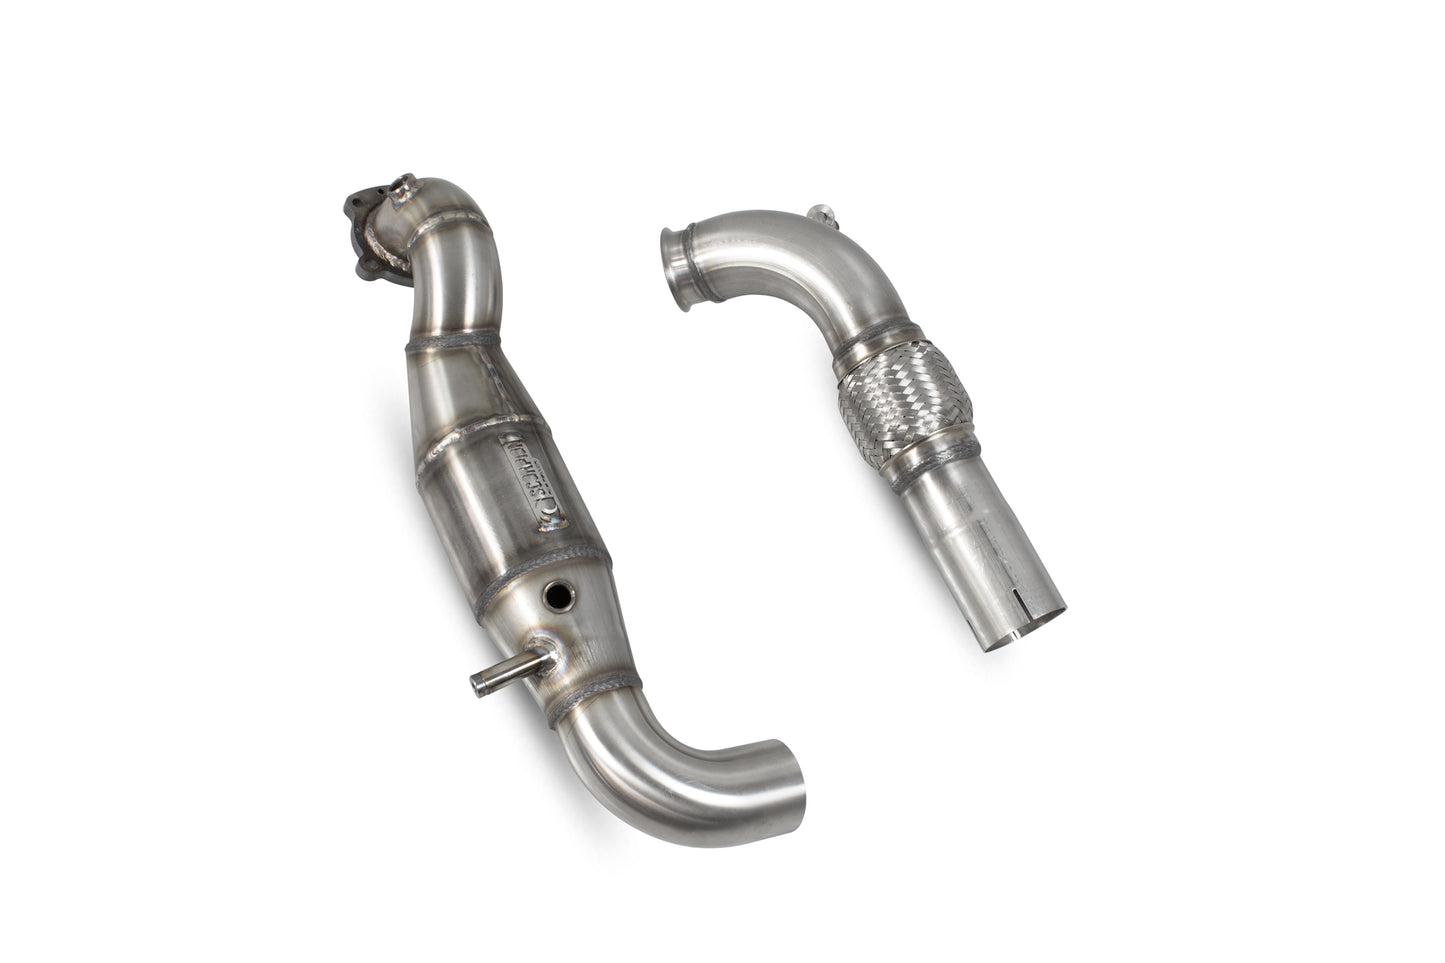 Scorpion SFDX088 Ford Fiesta Downpipe With High Flow Sports Catalyst | ML Performance UK UK